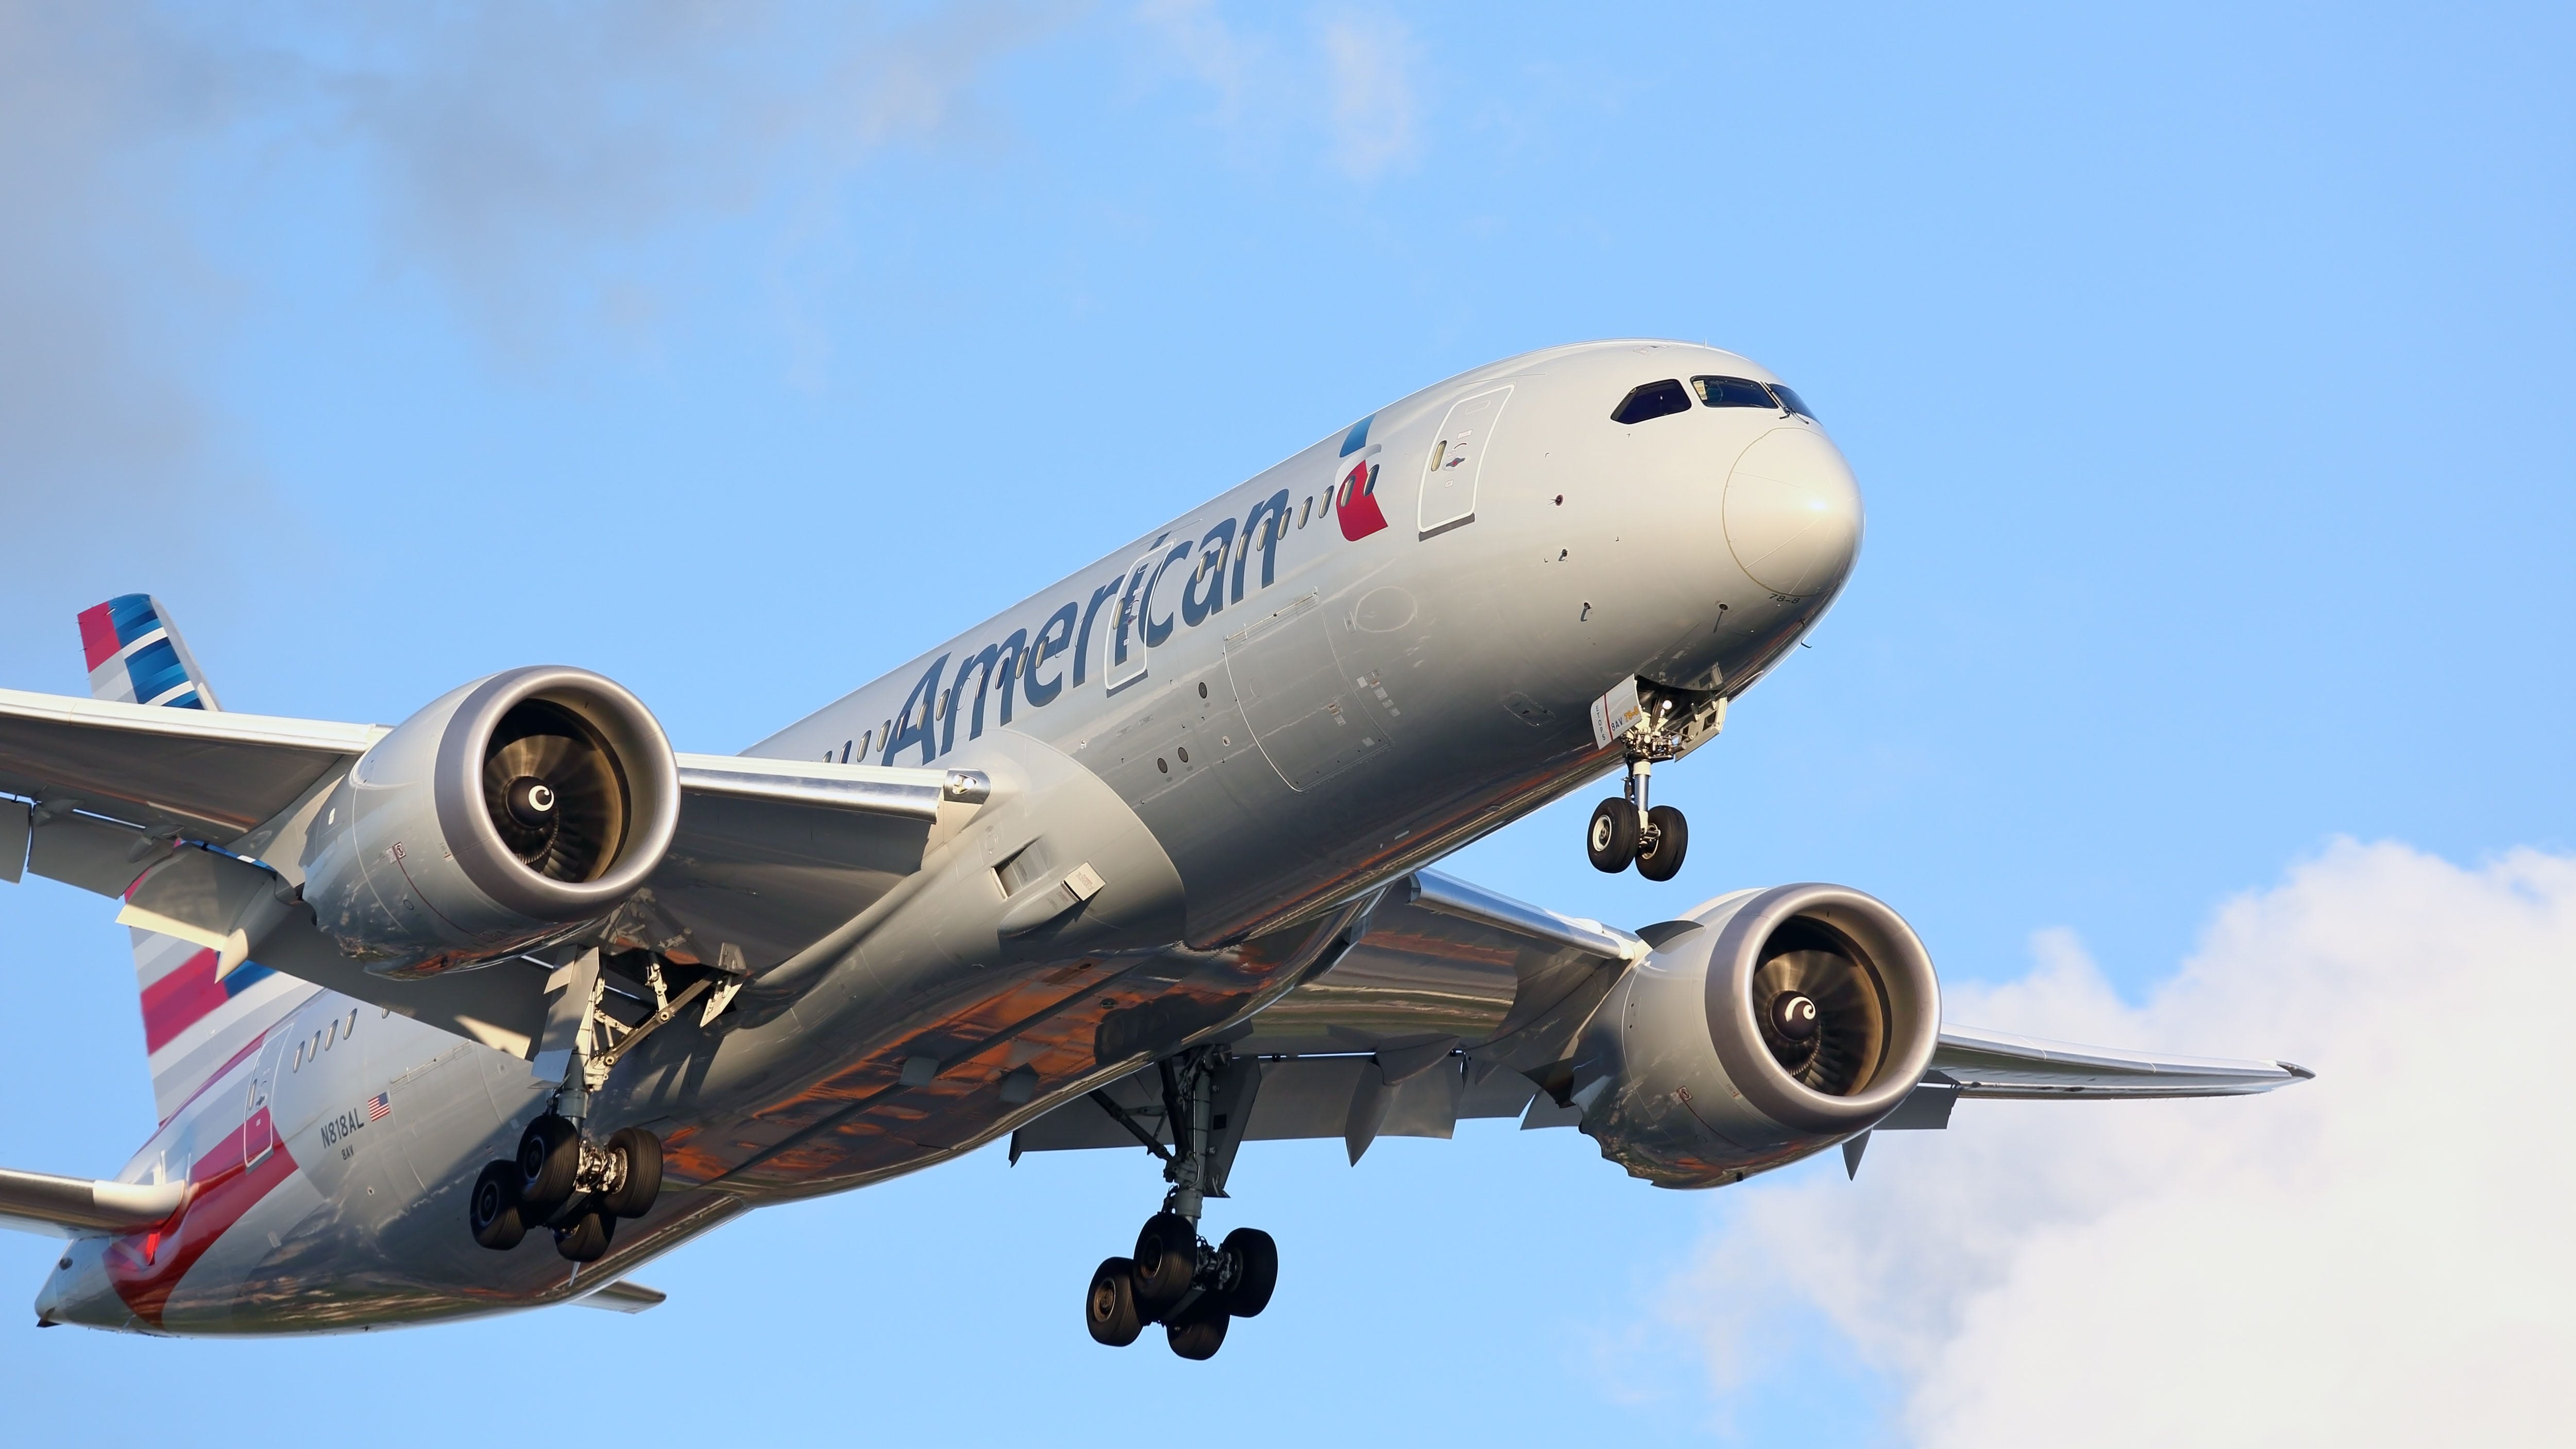 American Airlines Responds to Flight Deviation After Fighting Racial Slander: ‘Upset and Unacceptable’